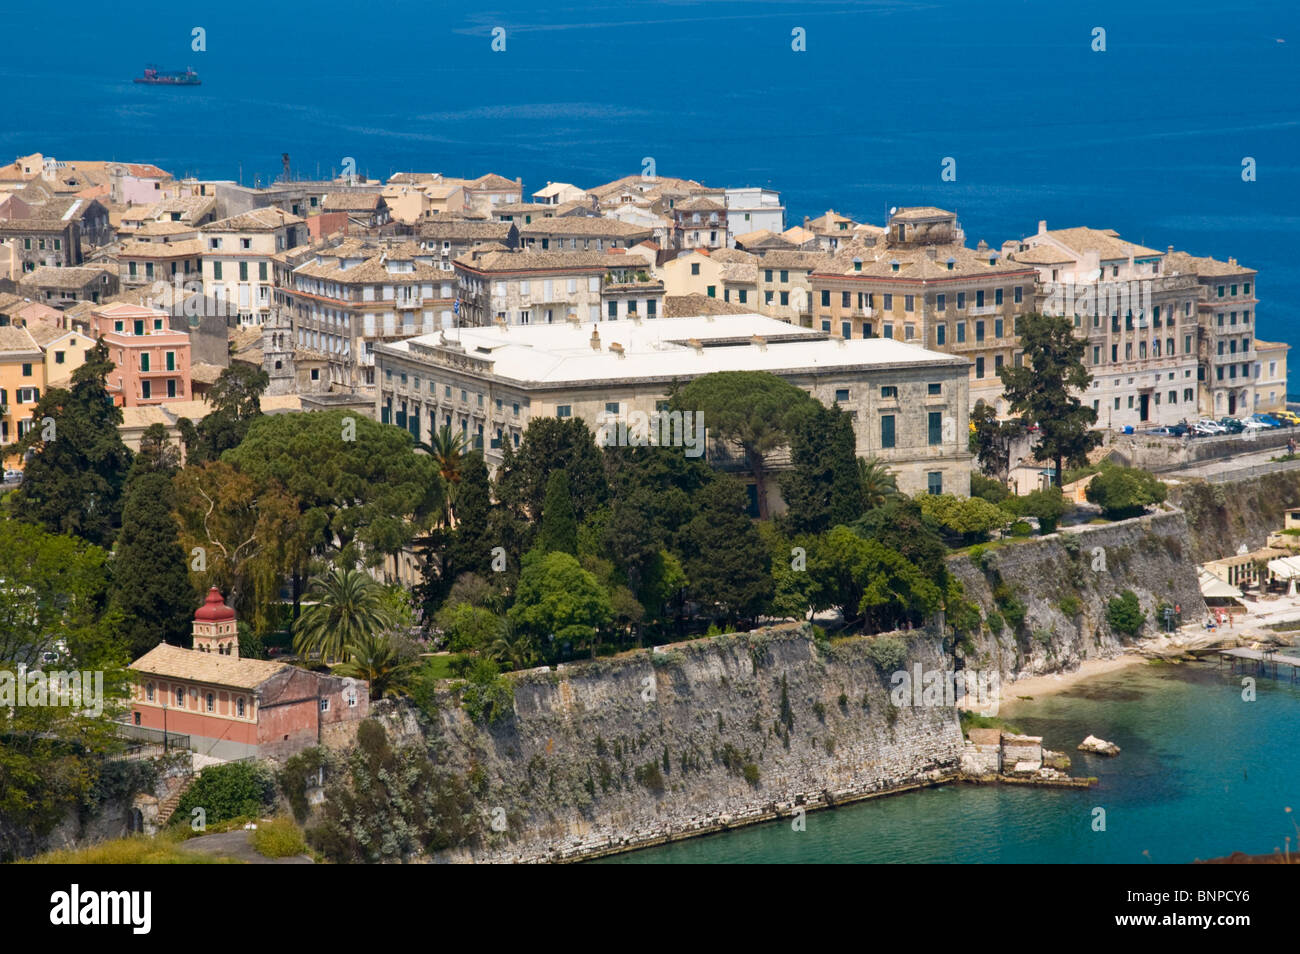 View over Venetian traditional style buildings in Corfu Old Town on the Greek island of Corfu Greece GR Stock Photo